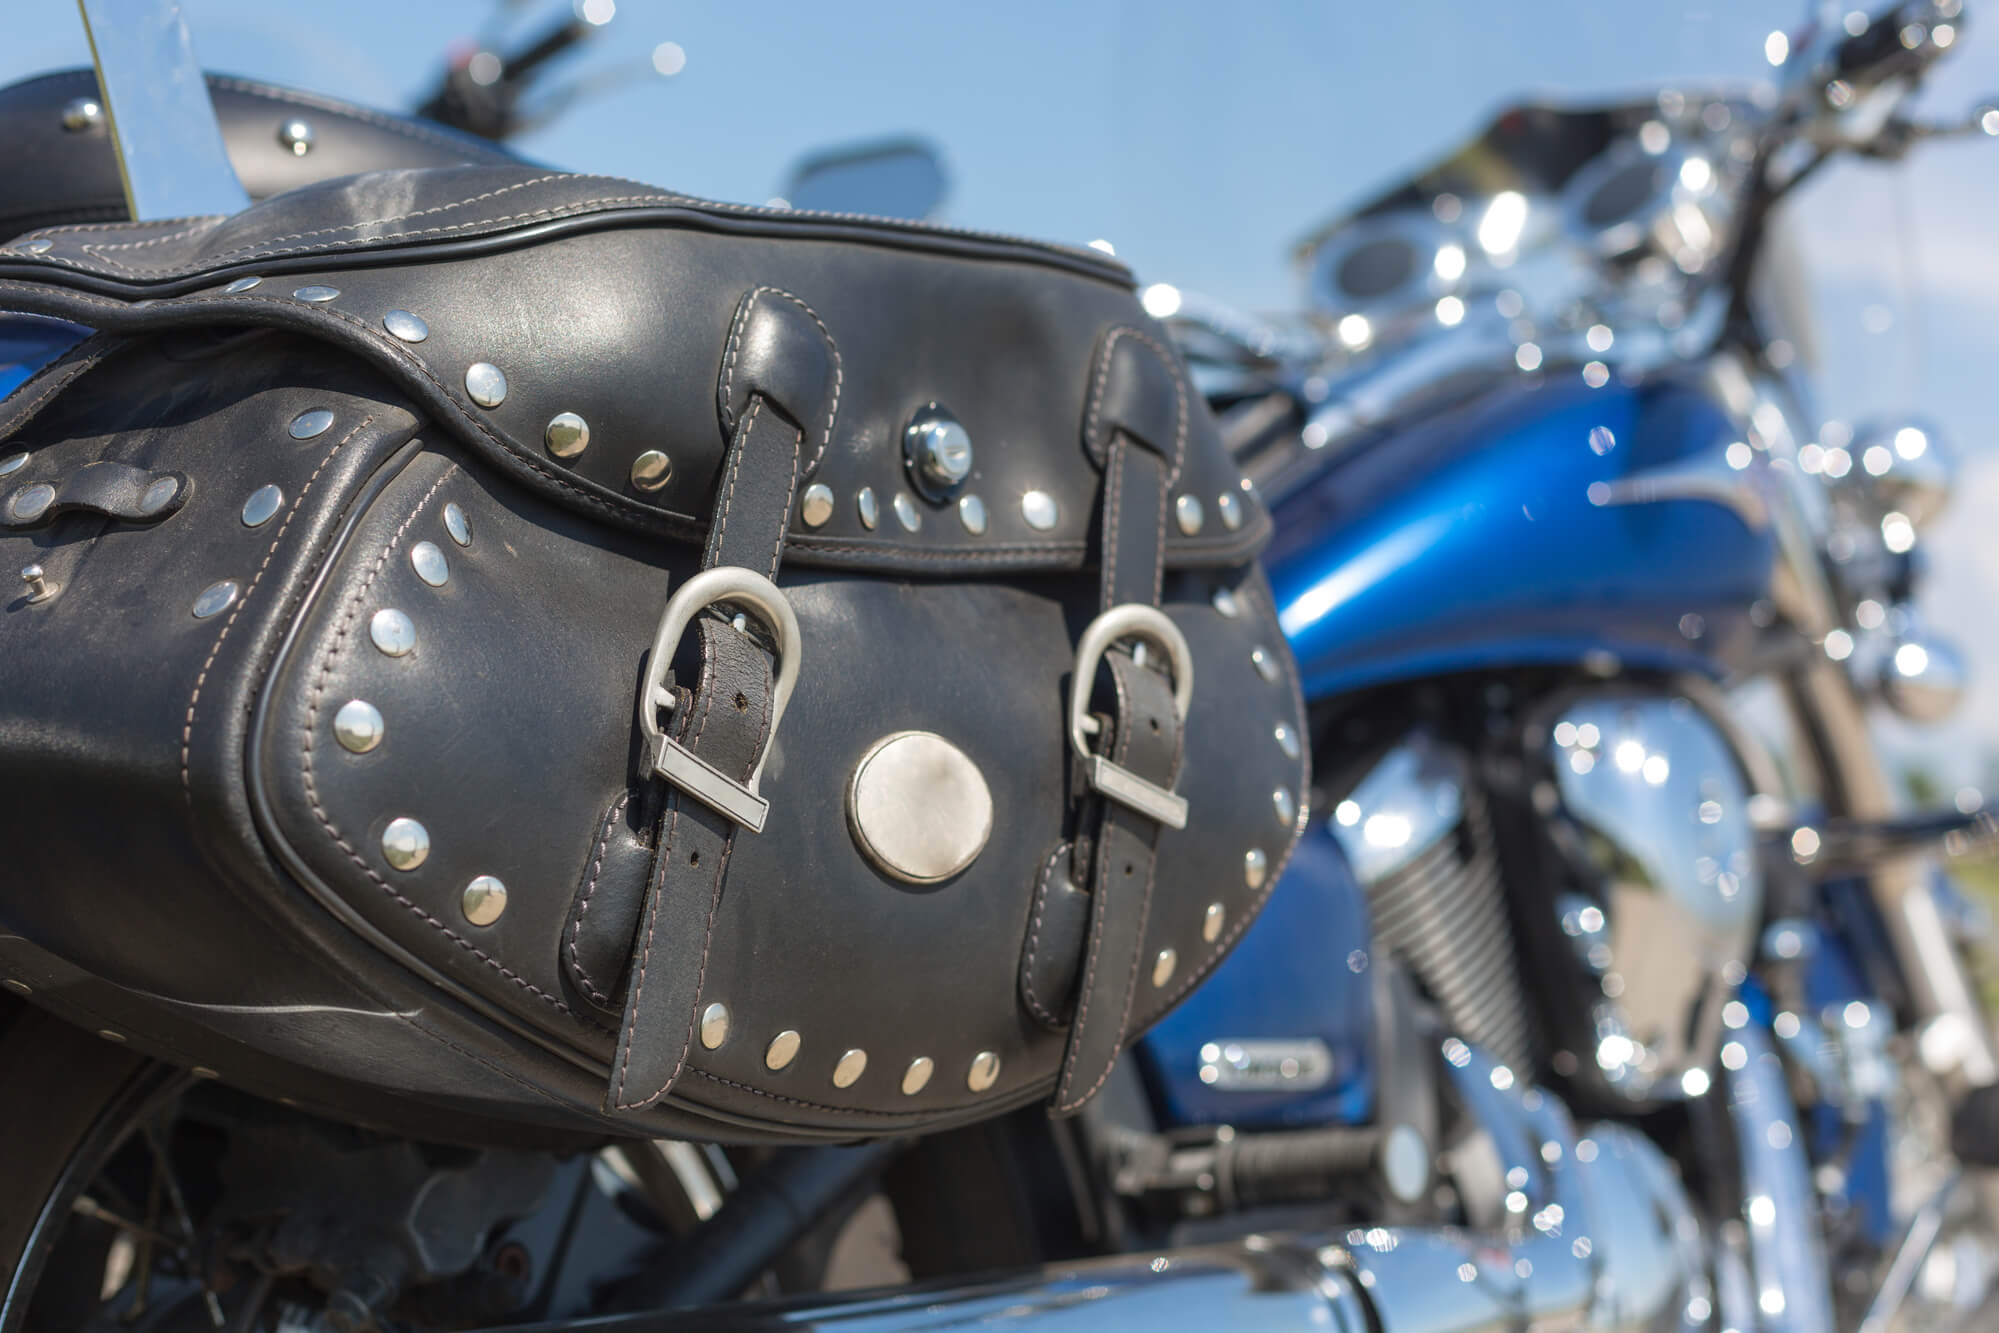 Best Motorcycle Saddlebags Review, Best Leather Motorcycle Saddlebags